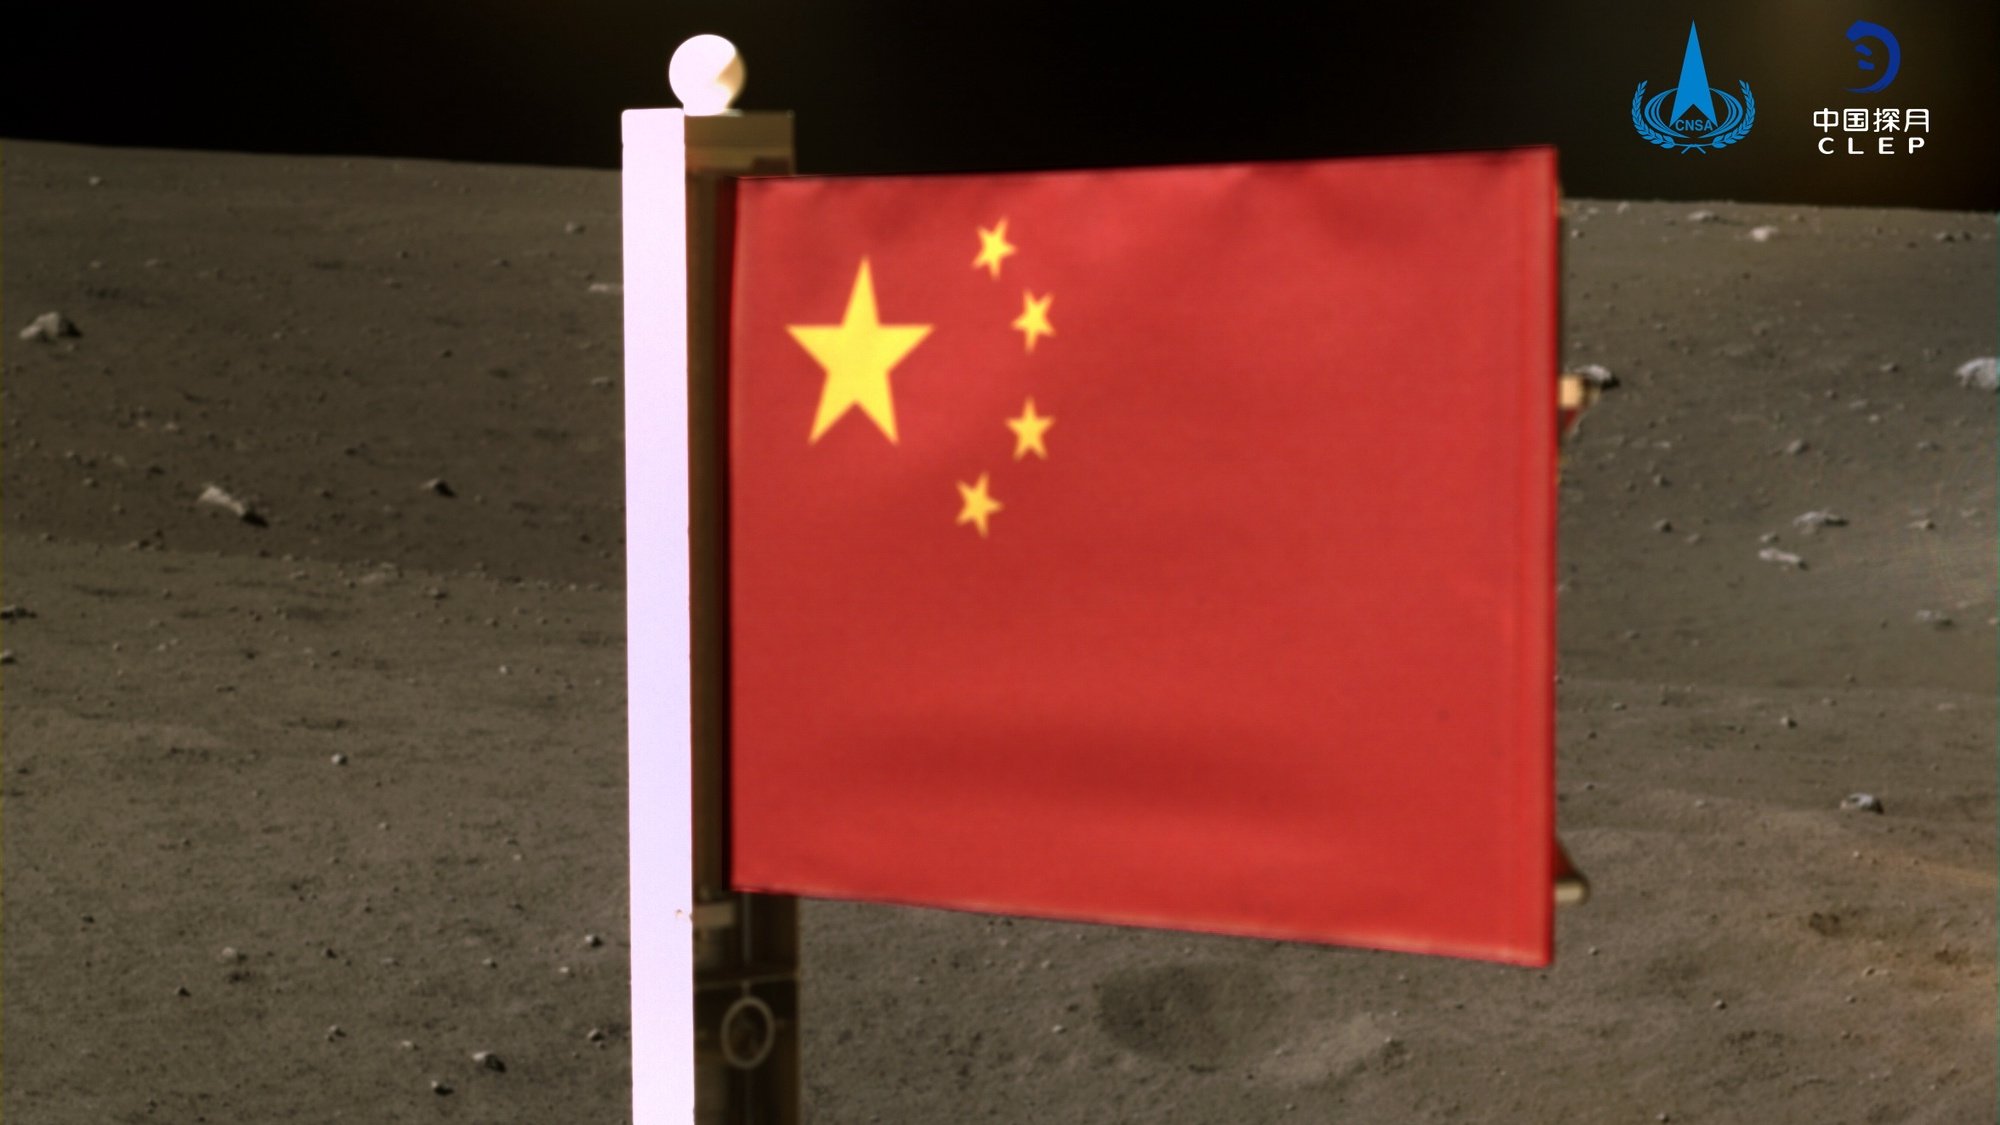 epa08861587 A handout photo made available by the China National Space Administration (CNSA) on 04 December 2020 and taken by a panoramic camera installed on the lander-ascender combination of the probe, before the ascender blasted off from the moon with lunar samples, shows China&#039;s national flag unfurled from the Chang&#039;e-5 probe on the moon on 03 December 2020.  EPA/CHINA NATIONAL SPACE ADMINISTRATION / HANDOUT HANDOUT EDITORIAL USE ONLY HANDOUT EDITORIAL USE ONLY/NO SALES